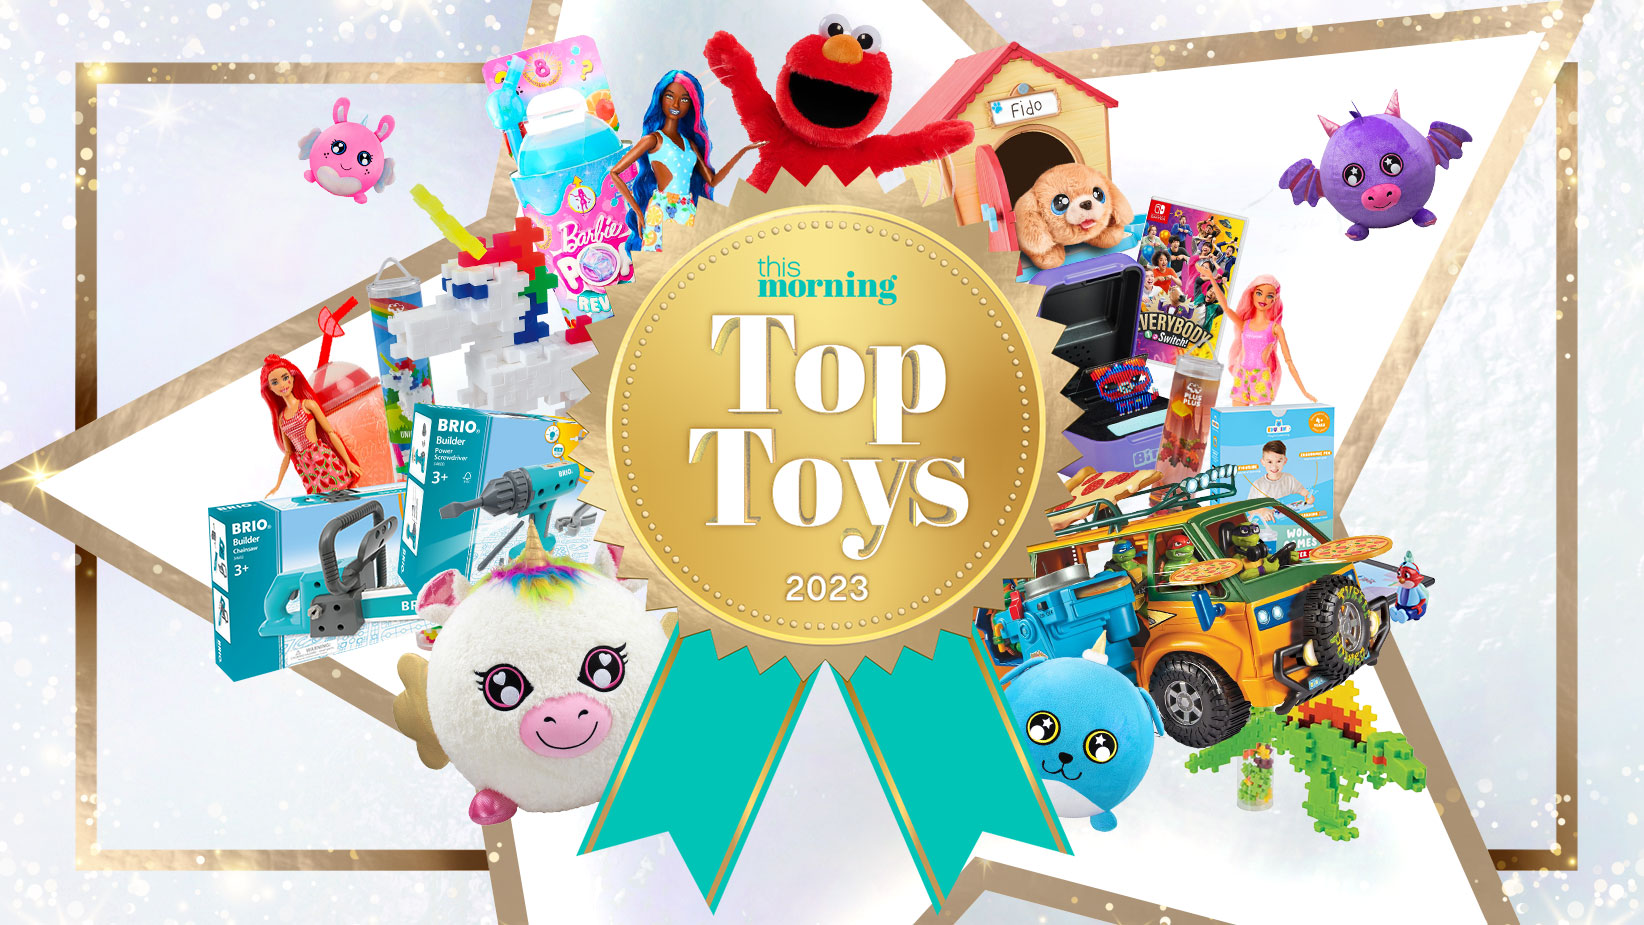 This Morning reveal the Top Toys for Christmas 2023!